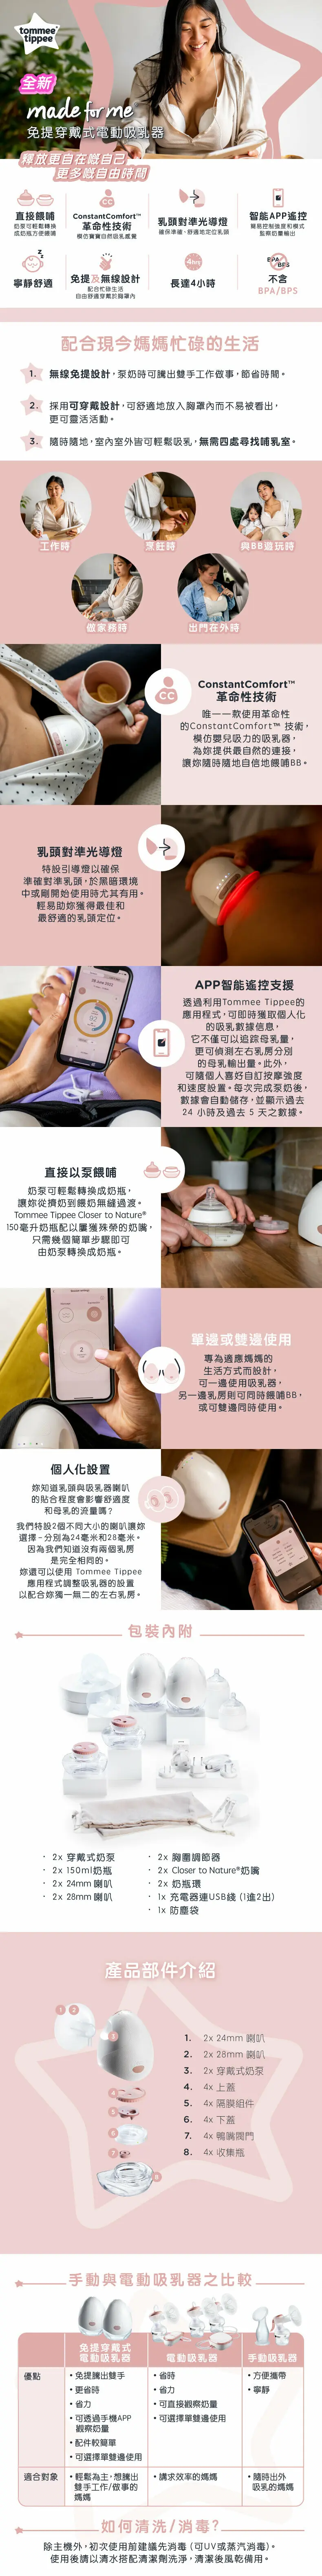 Tommee Tippee Made for Me 双边免提穿戴式吸乳器